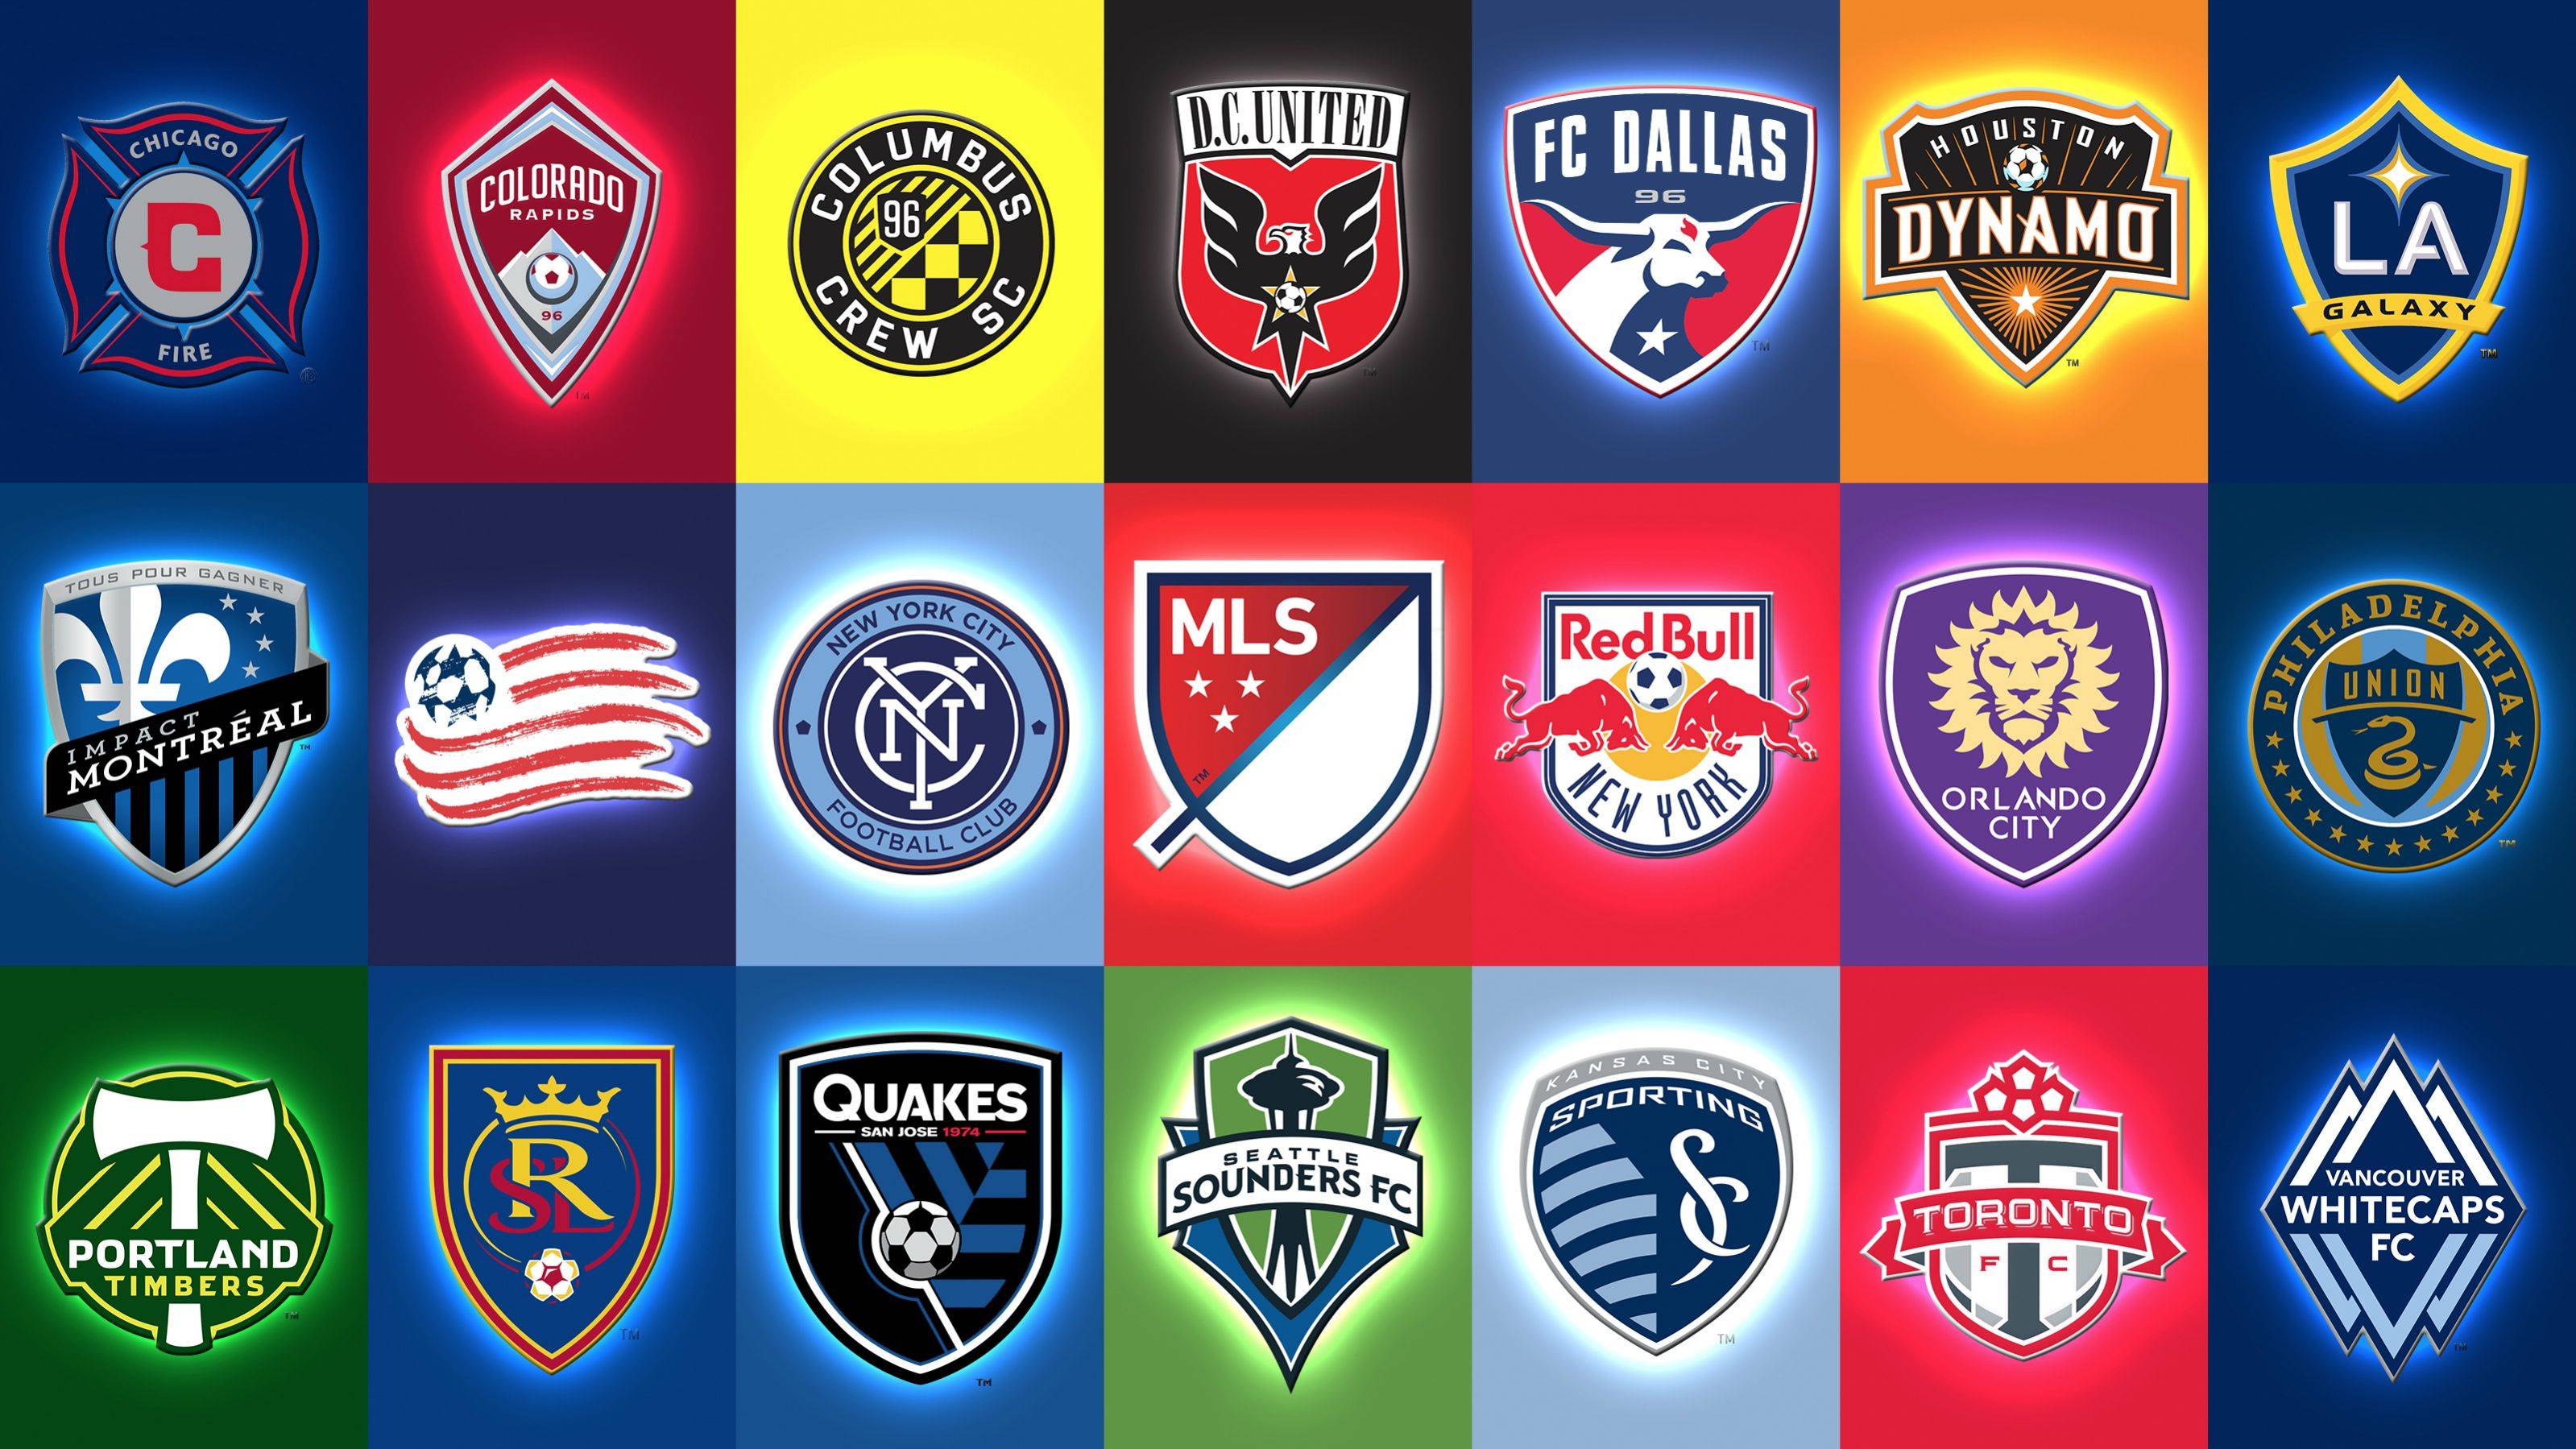 I made an MLS wallpaper because I'm snowed in. You can use it if you